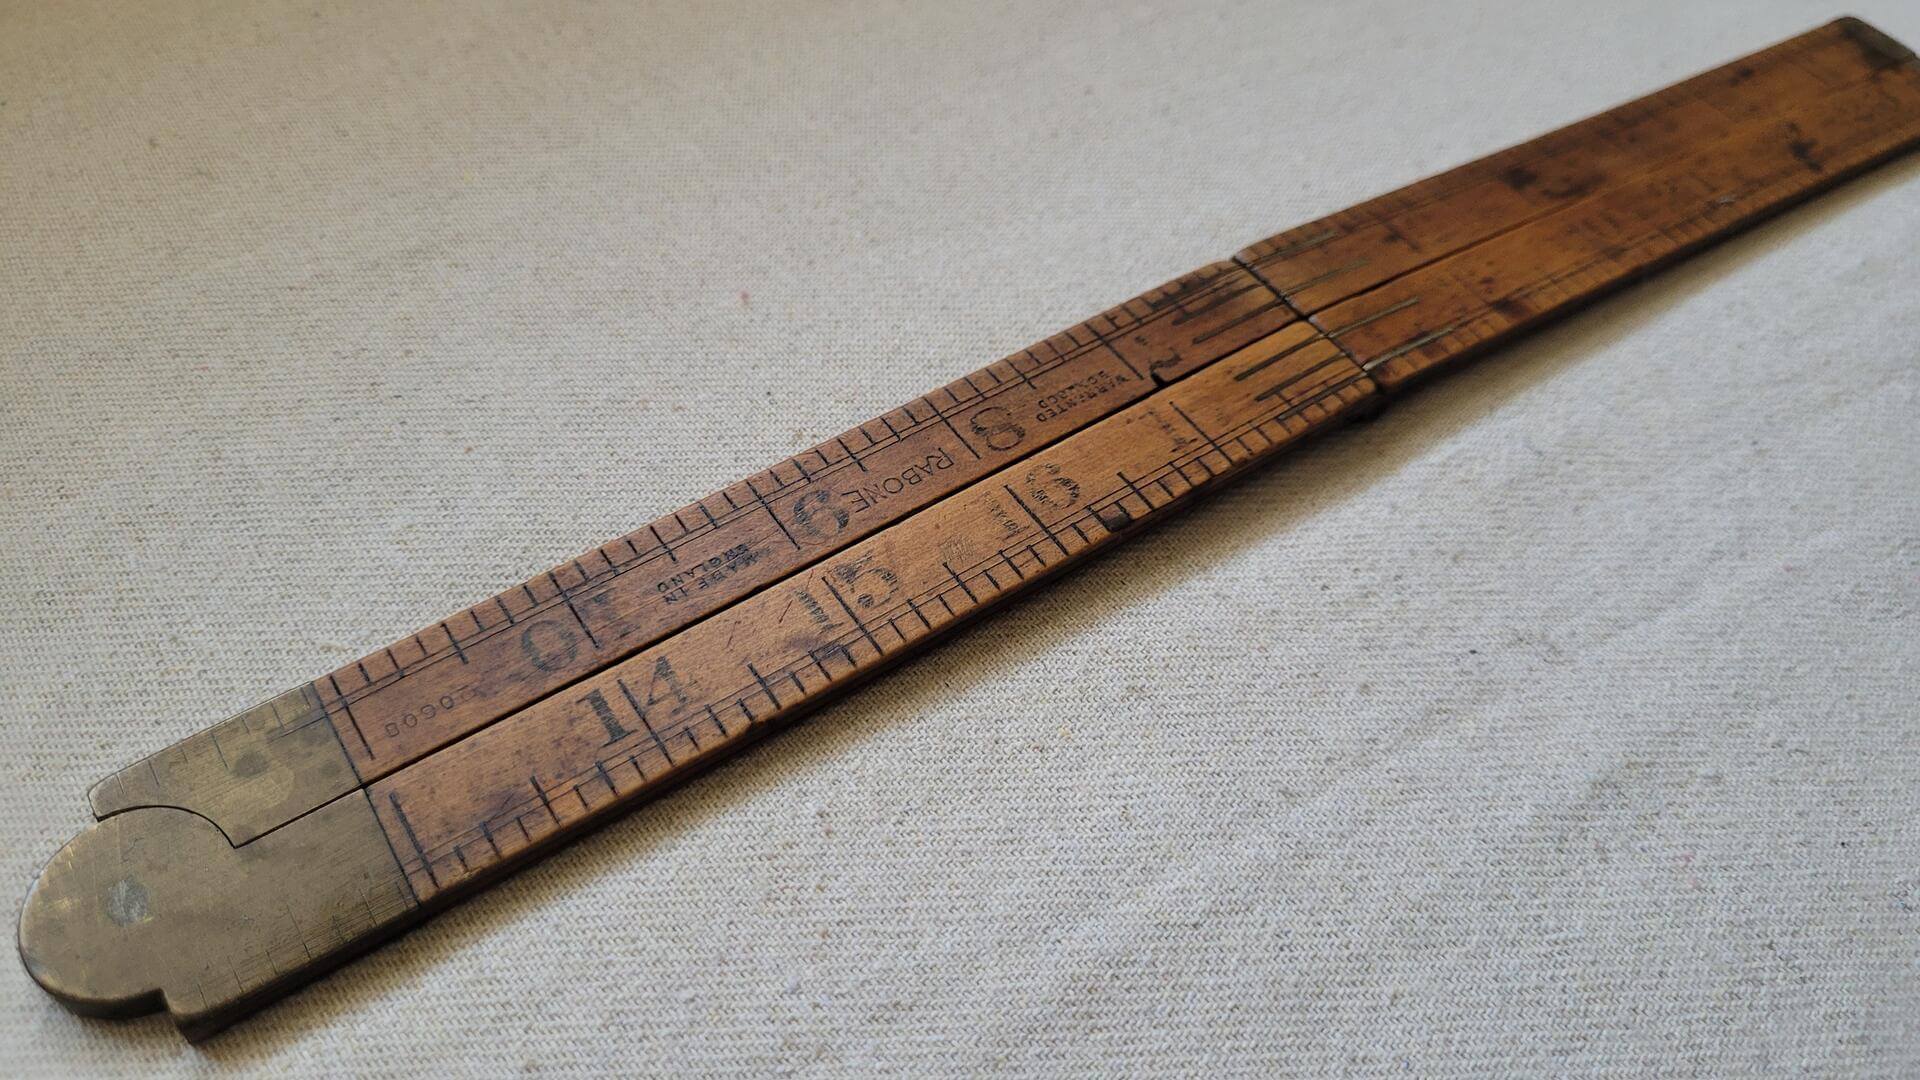 Vintage Rabone No. 6080 warranted boxwood and brass folding ruler two feet long. Rare antique made in England collectible yardstick and measuring tool